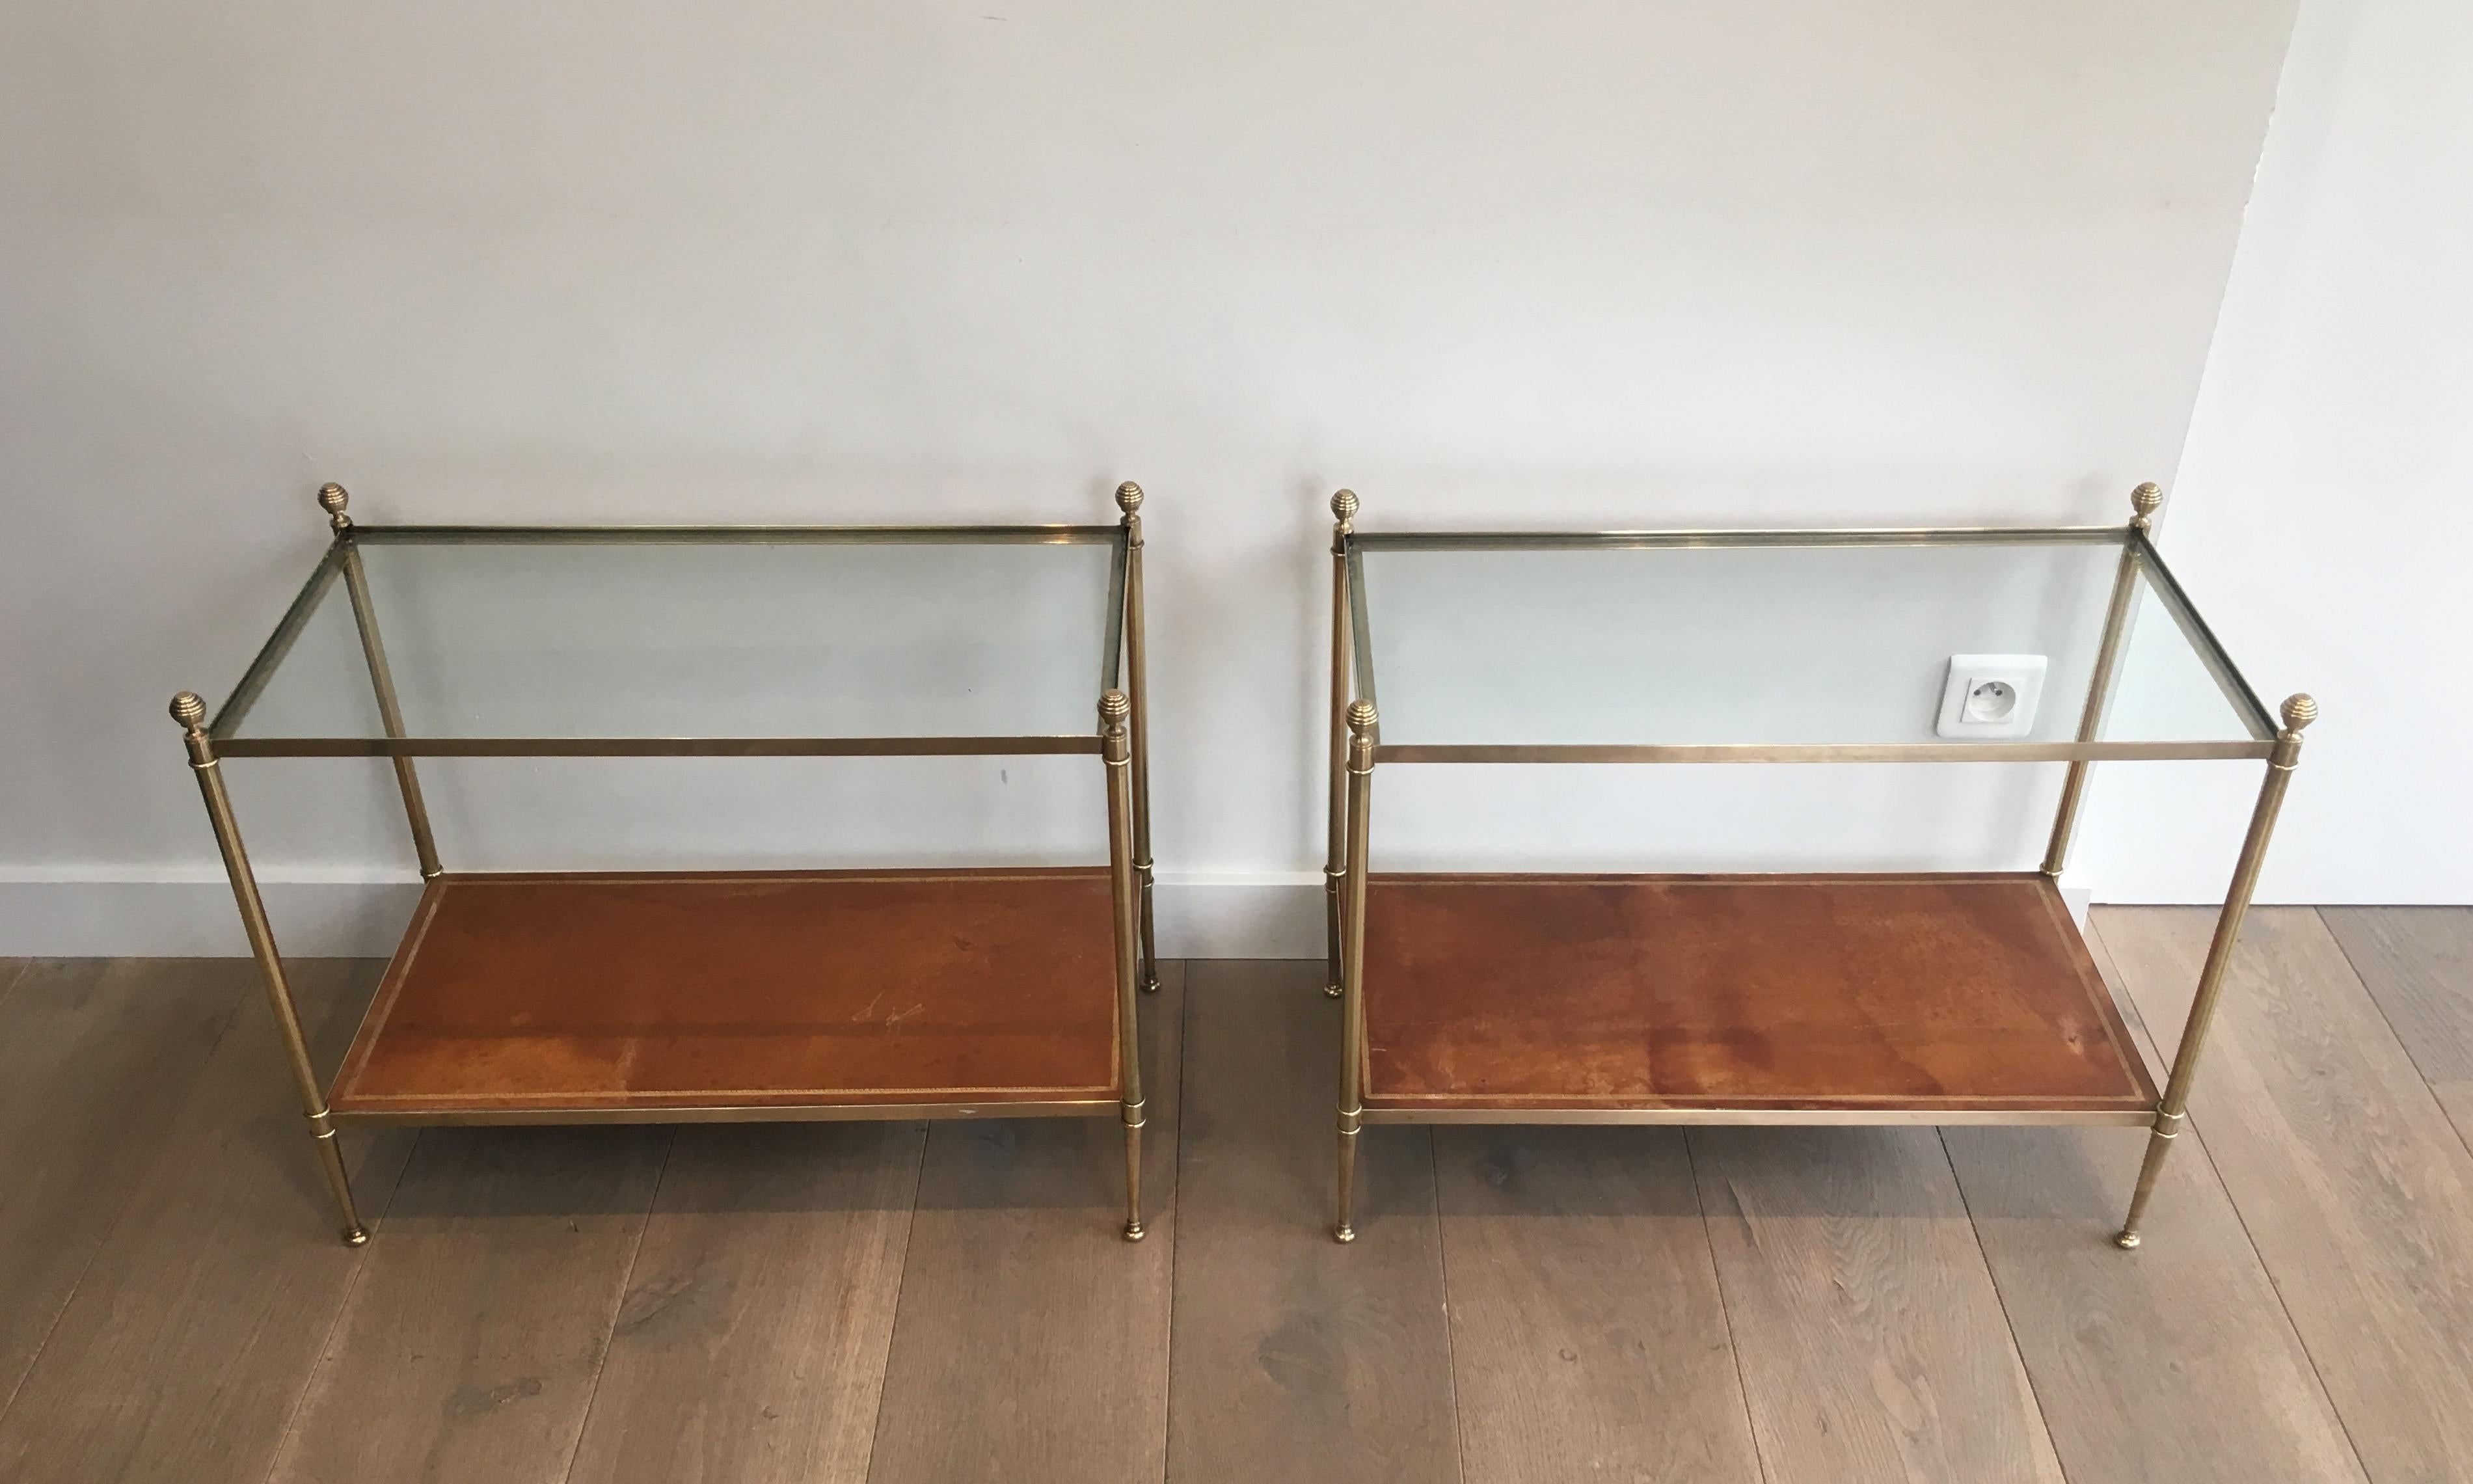 This rare pair of large neoclassical style side tables is made of brass with leather shelves on bottom and clear glass shelves on top. This is a very nice pair of end tables, very fine with very nice original brown golden iron leathers. These side